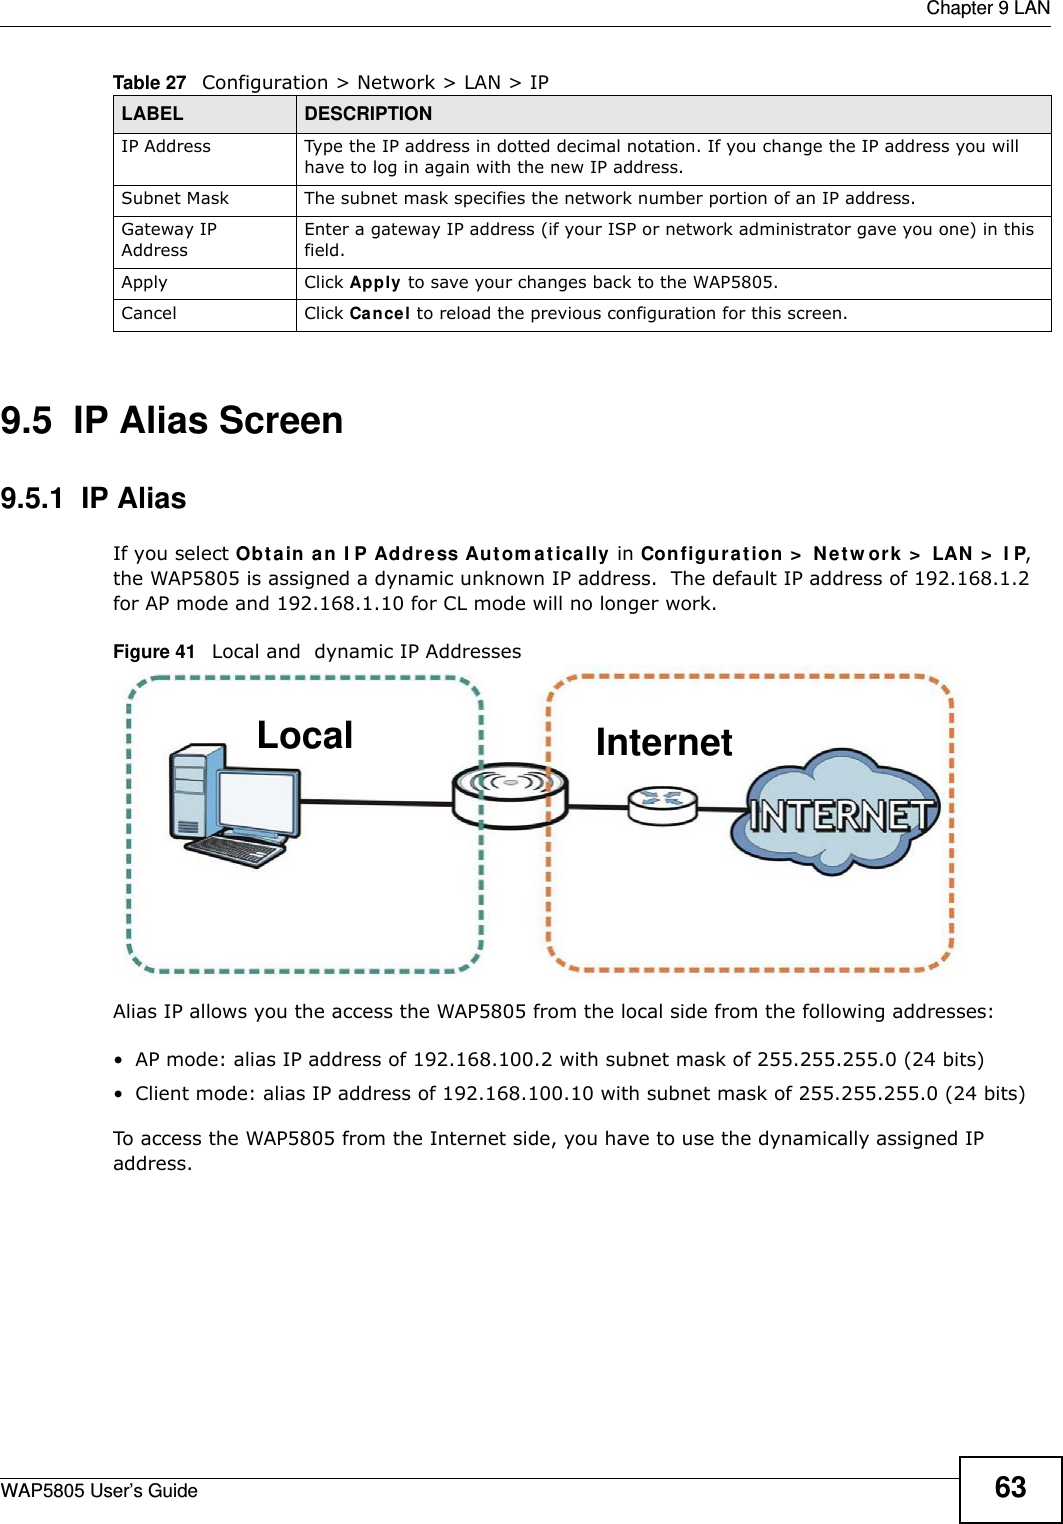  Chapter 9 LANWAP5805 User’s Guide 639.5  IP Alias Screen  9.5.1  IP AliasIf you select Obtain an IP Address Automatically in Configuration &gt; Network &gt; LAN &gt; IP, the WAP5805 is assigned a dynamic unknown IP address.  The default IP address of 192.168.1.2 for AP mode and 192.168.1.10 for CL mode will no longer work.Figure 41   Local and  dynamic IP AddressesAlias IP allows you the access the WAP5805 from the local side from the following addresses:• AP mode: alias IP address of 192.168.100.2 with subnet mask of 255.255.255.0 (24 bits)• Client mode: alias IP address of 192.168.100.10 with subnet mask of 255.255.255.0 (24 bits)To access the WAP5805 from the Internet side, you have to use the dynamically assigned IP address.IP Address Type the IP address in dotted decimal notation. If you change the IP address you will have to log in again with the new IP address.   Subnet Mask The subnet mask specifies the network number portion of an IP address. Gateway IP AddressEnter a gateway IP address (if your ISP or network administrator gave you one) in this field.Apply Click Apply to save your changes back to the WAP5805.Cancel Click Cancel to reload the previous configuration for this screen.Table 27   Configuration &gt; Network &gt; LAN &gt; IPLABEL DESCRIPTIONInternetLocal